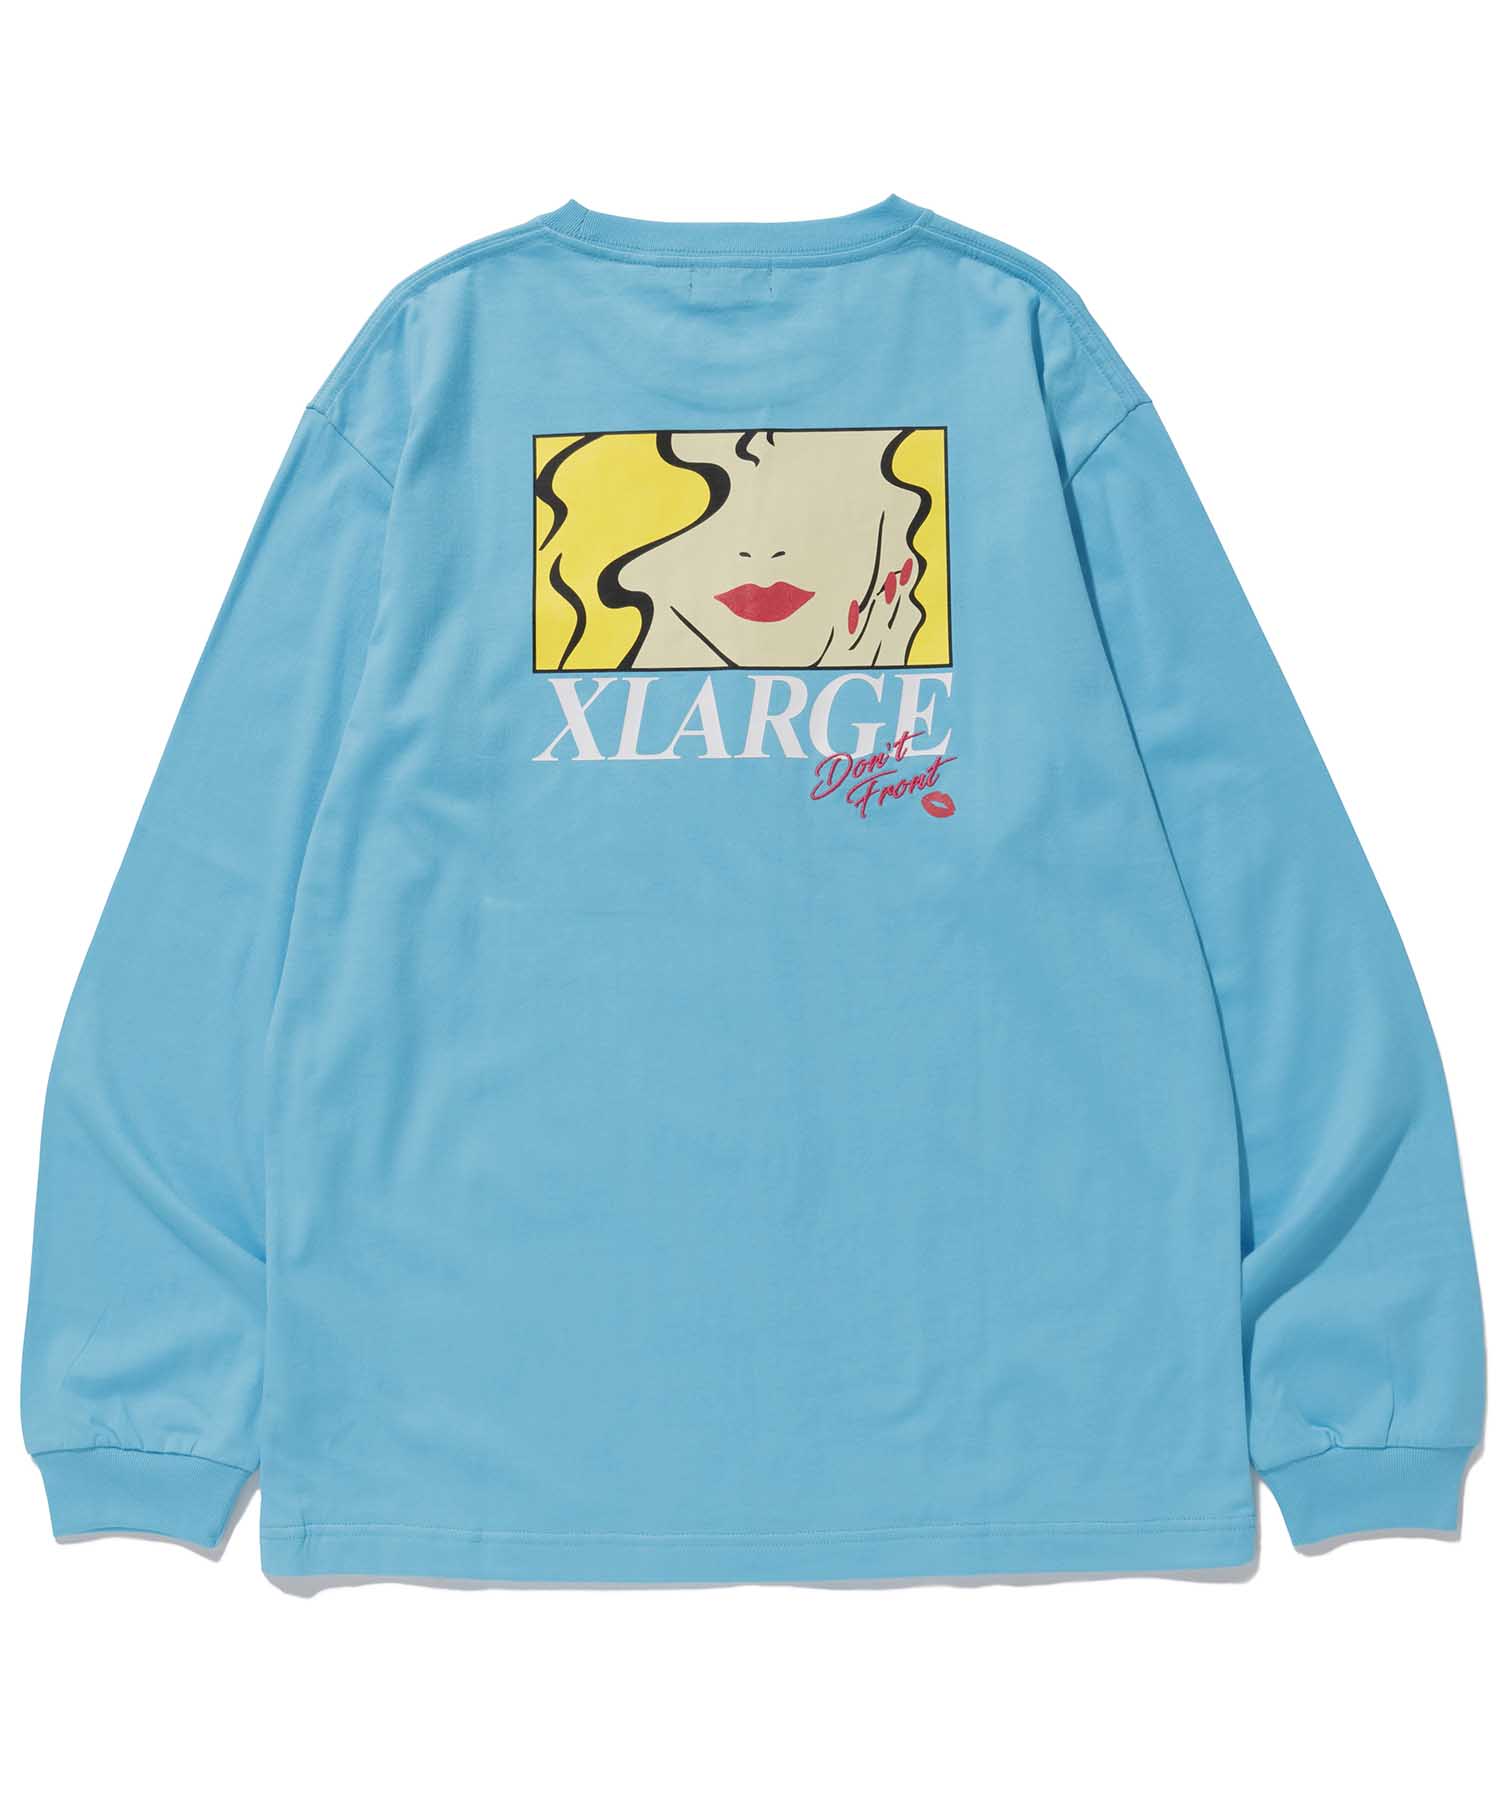 L/S TEE MARRIAGE BLUE T-SHIRT XLARGE  